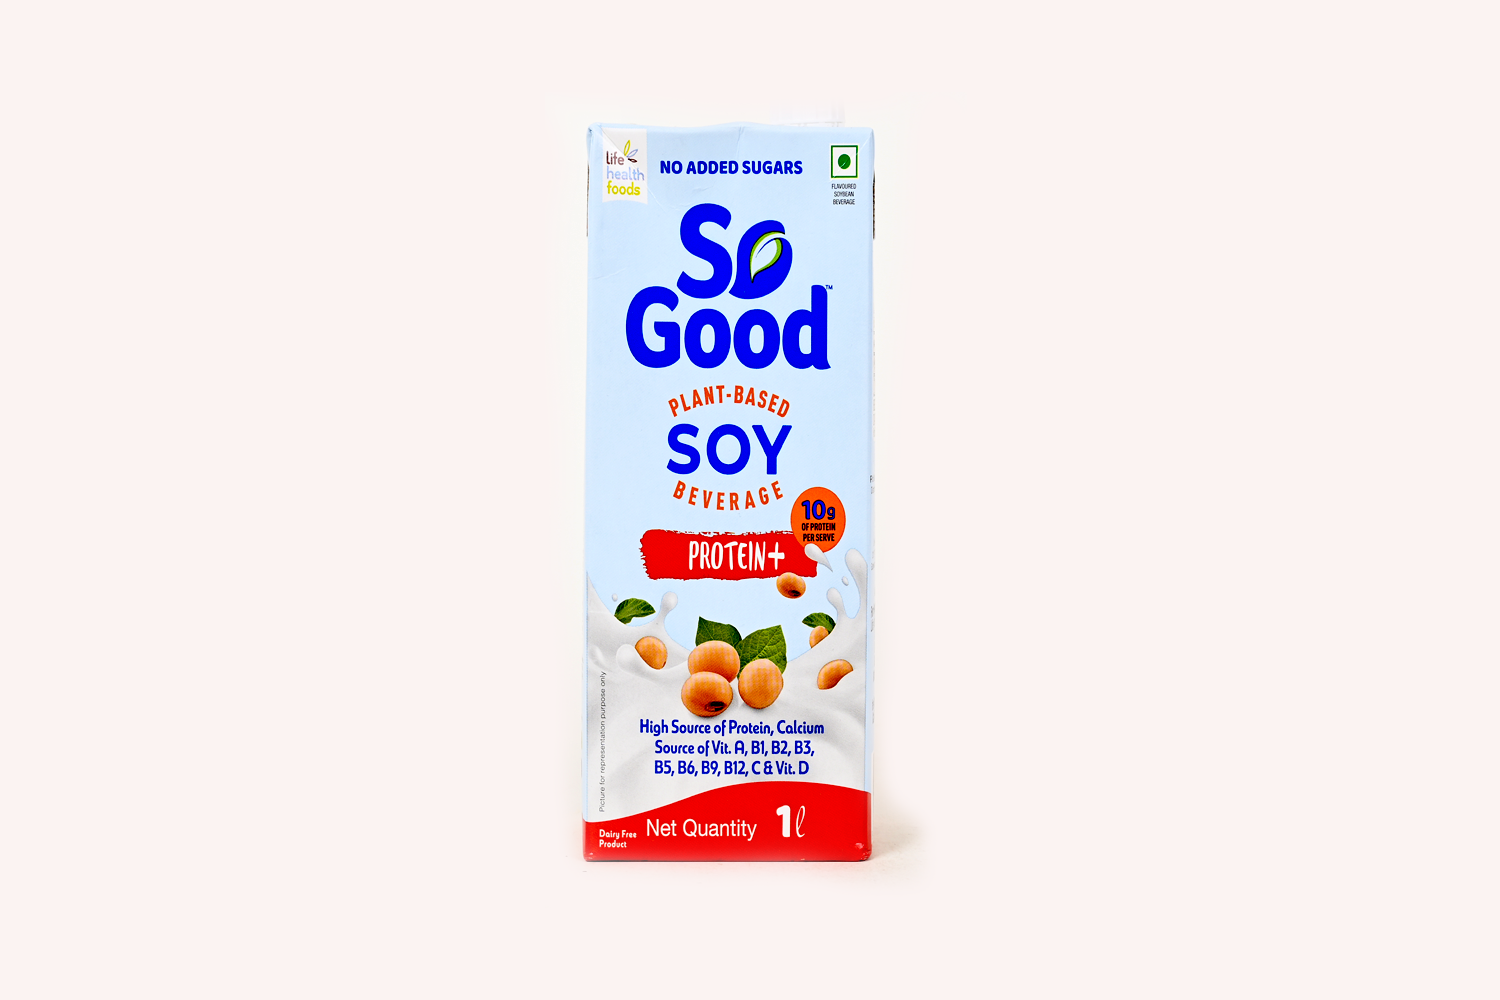 So Good Soy Protein+ Plant Based Beverage